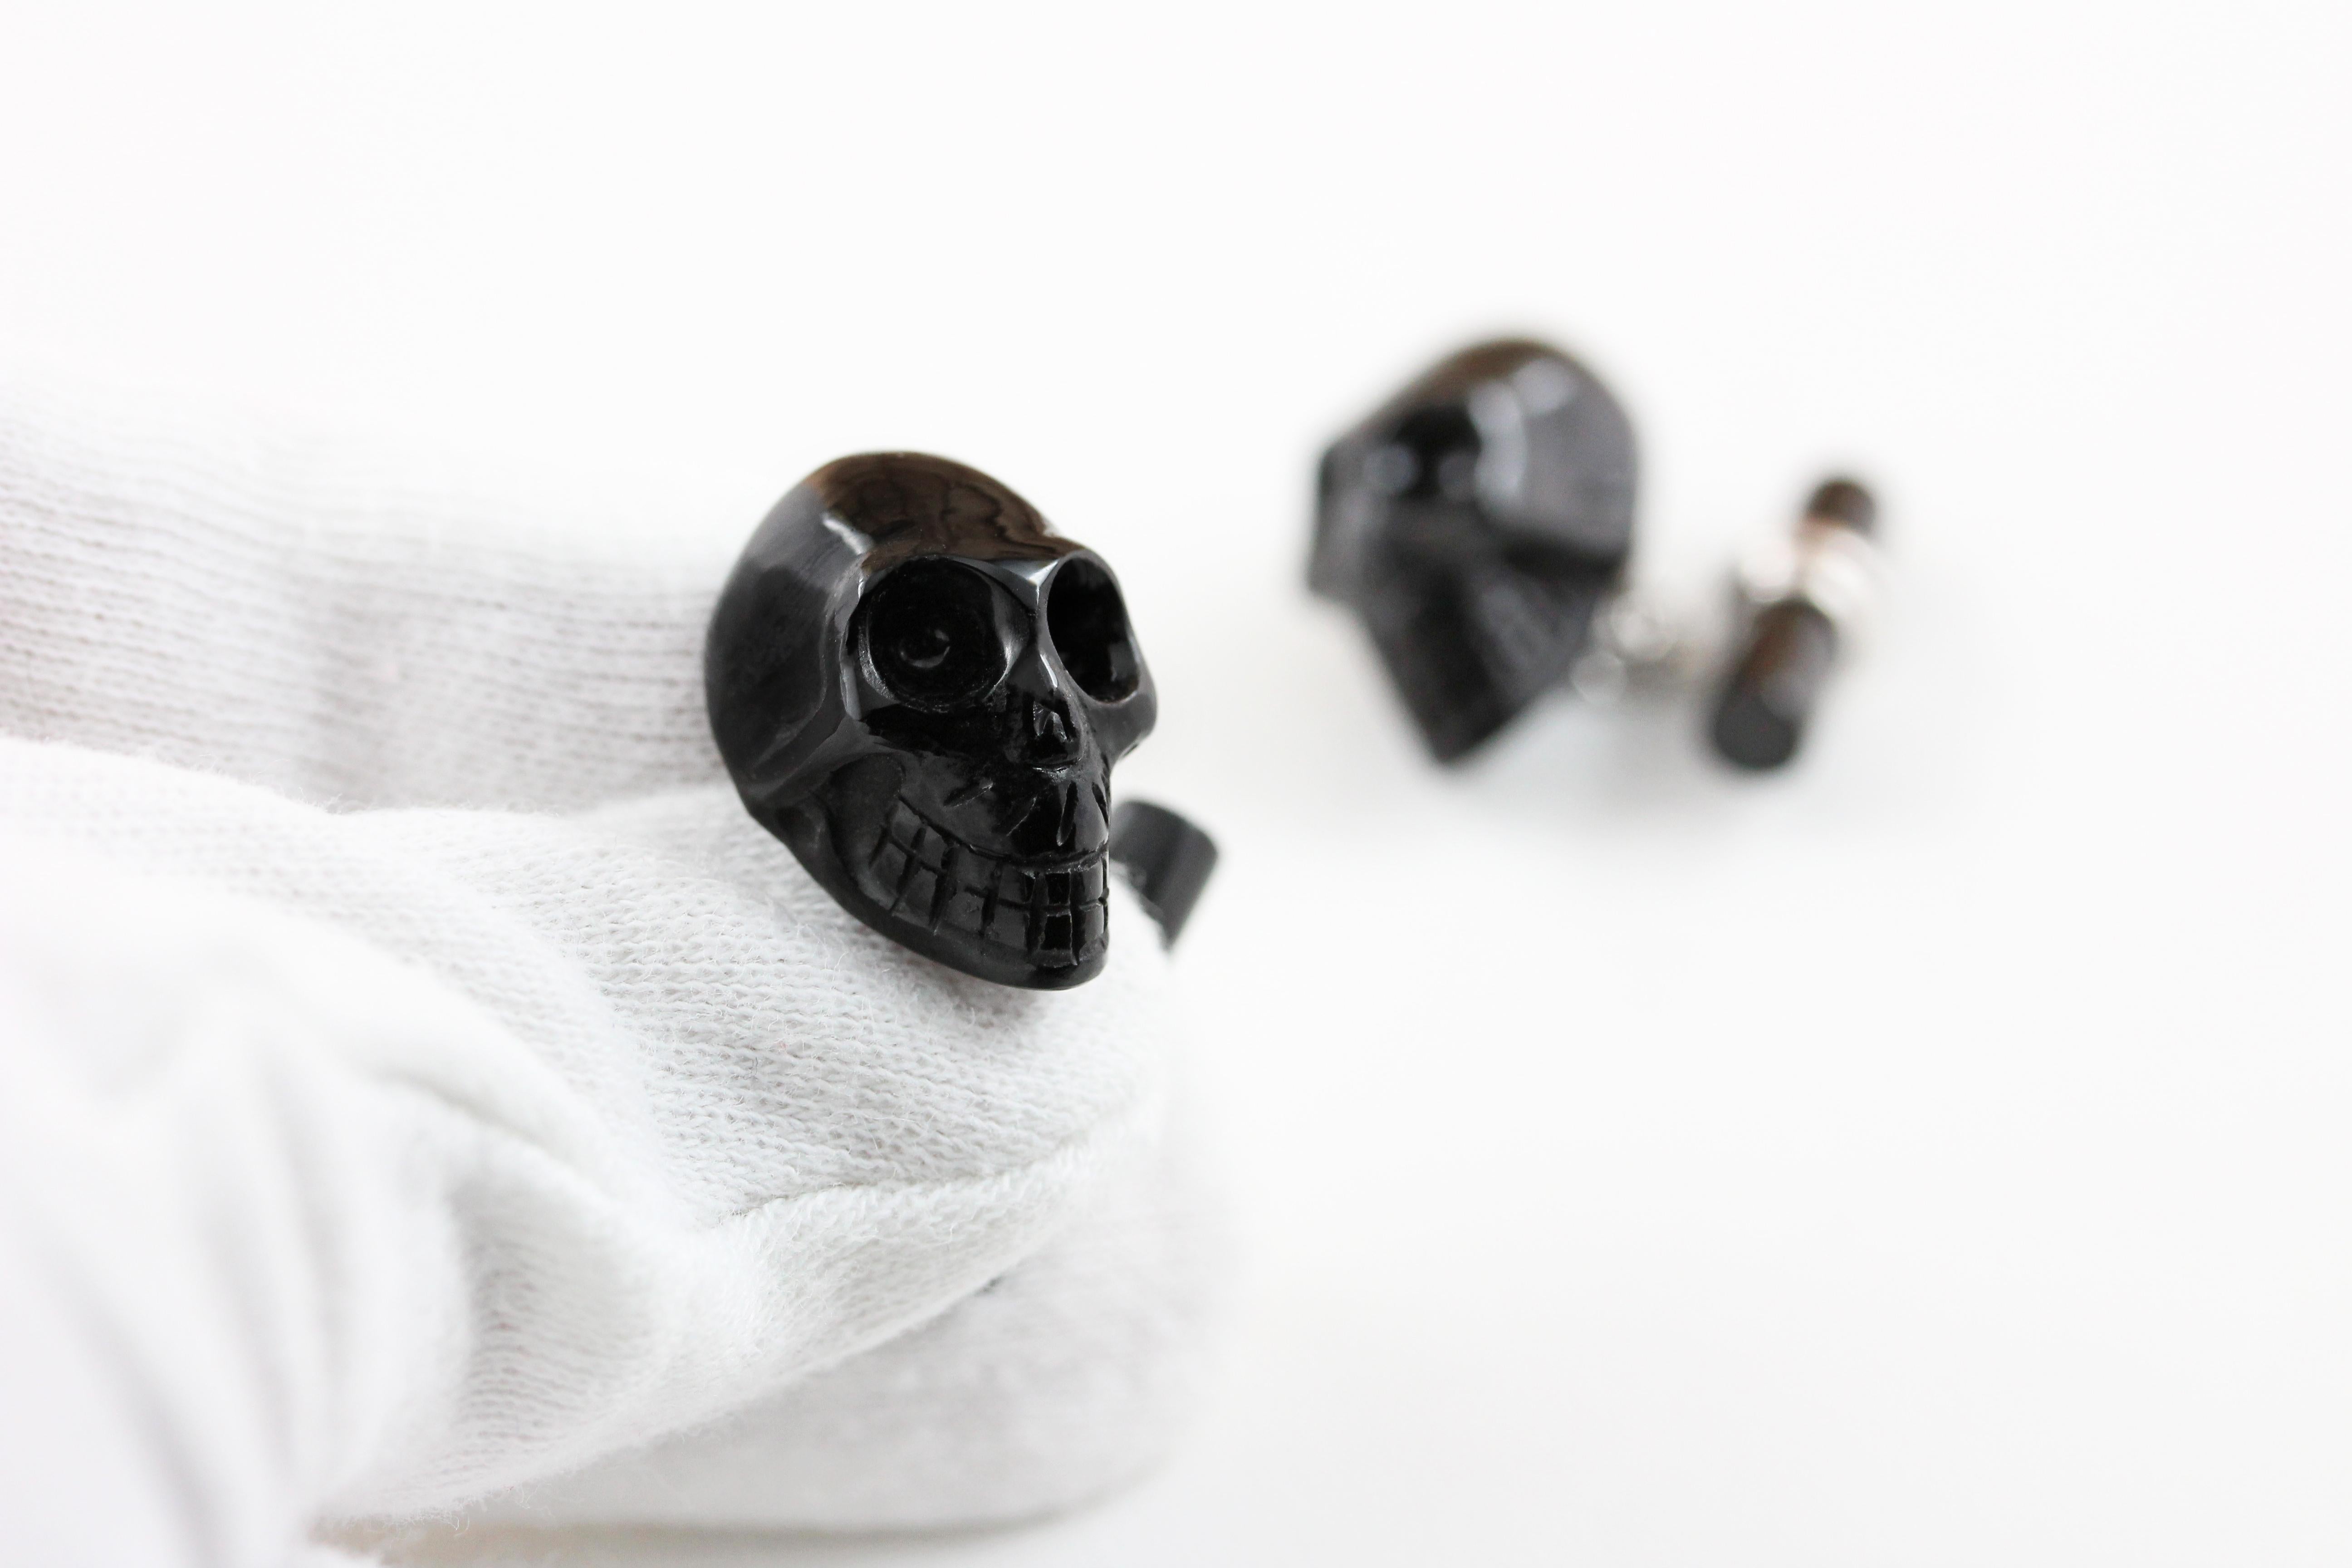 These striking cufflinks are a bold and elegant addition to any attire. 
They are made entirely of black onyx stone and, while the toggle is a simple cylinder, the front face is the protagonist of the piece, shaped as a skull with striking textures